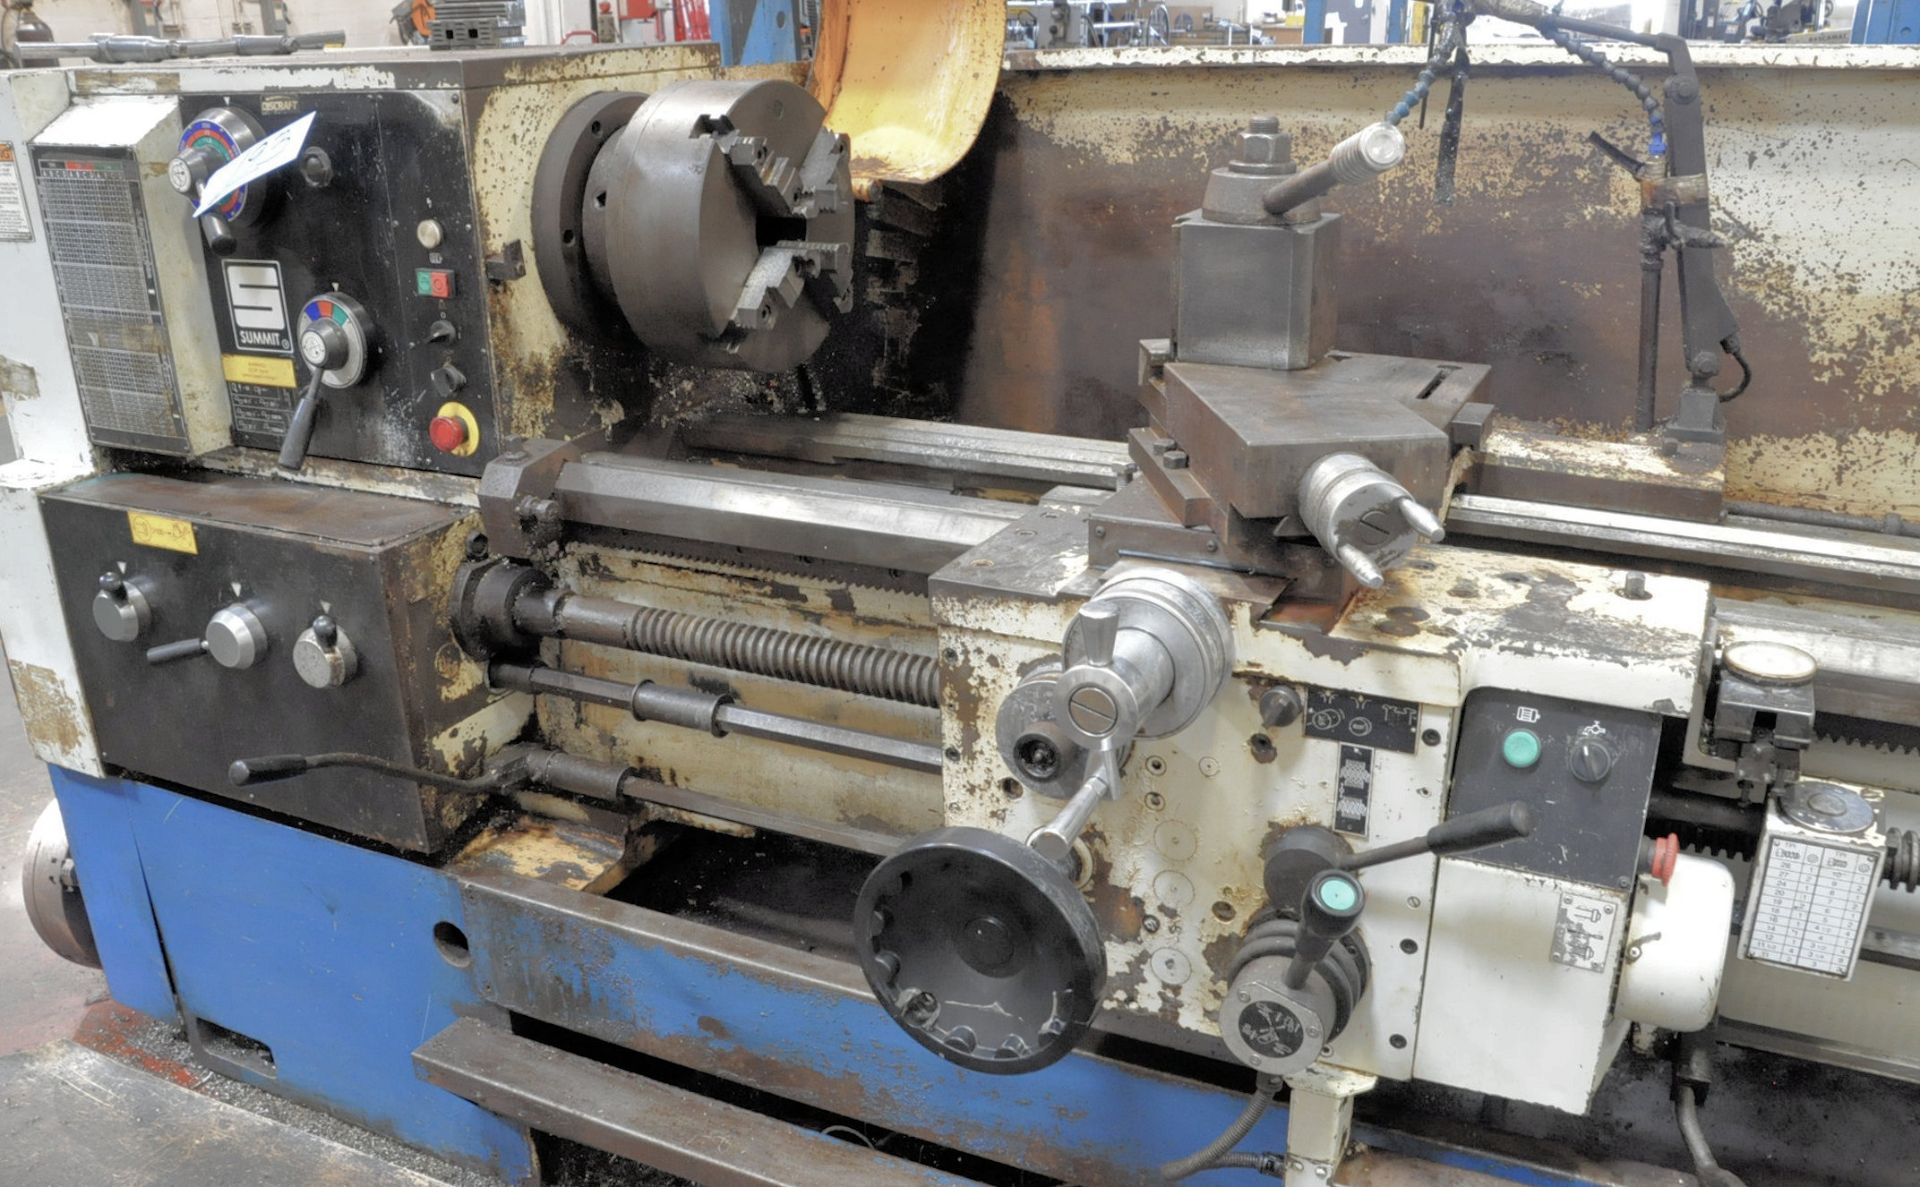 Summit Model 20X120 B, 20" x 120" Geared Head Engine Lathe,12" 4-Jaw Chuck, 4" Hole Through Spindle - Image 3 of 8